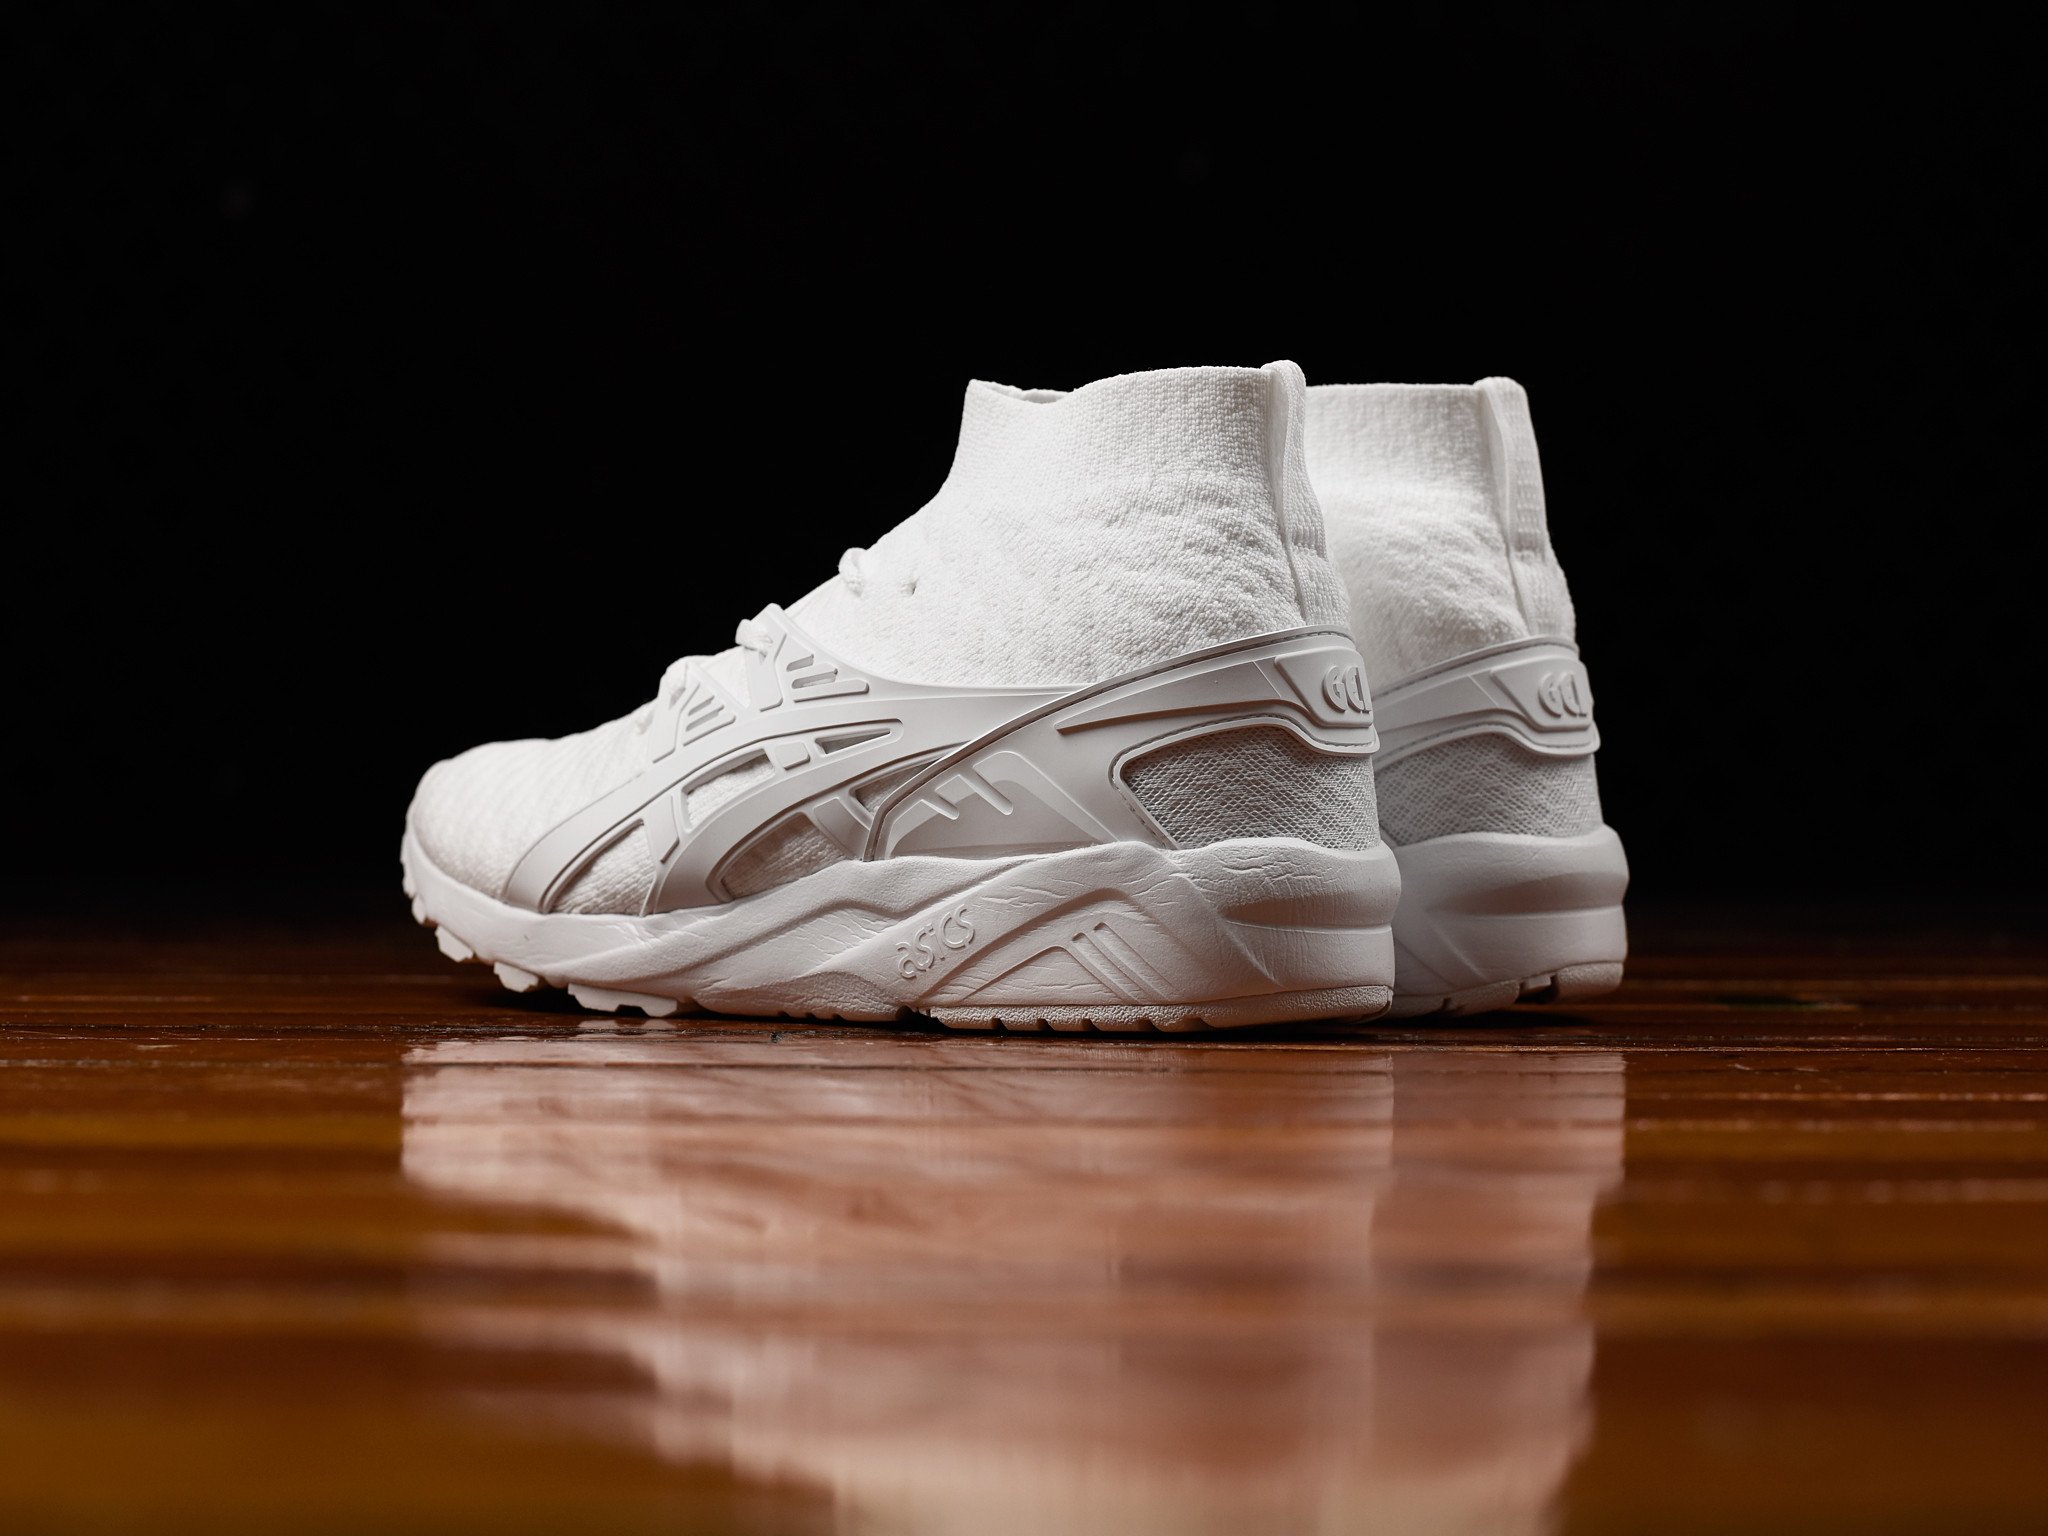 Asics Gel-Kayano Trainer Knit MT for 45 